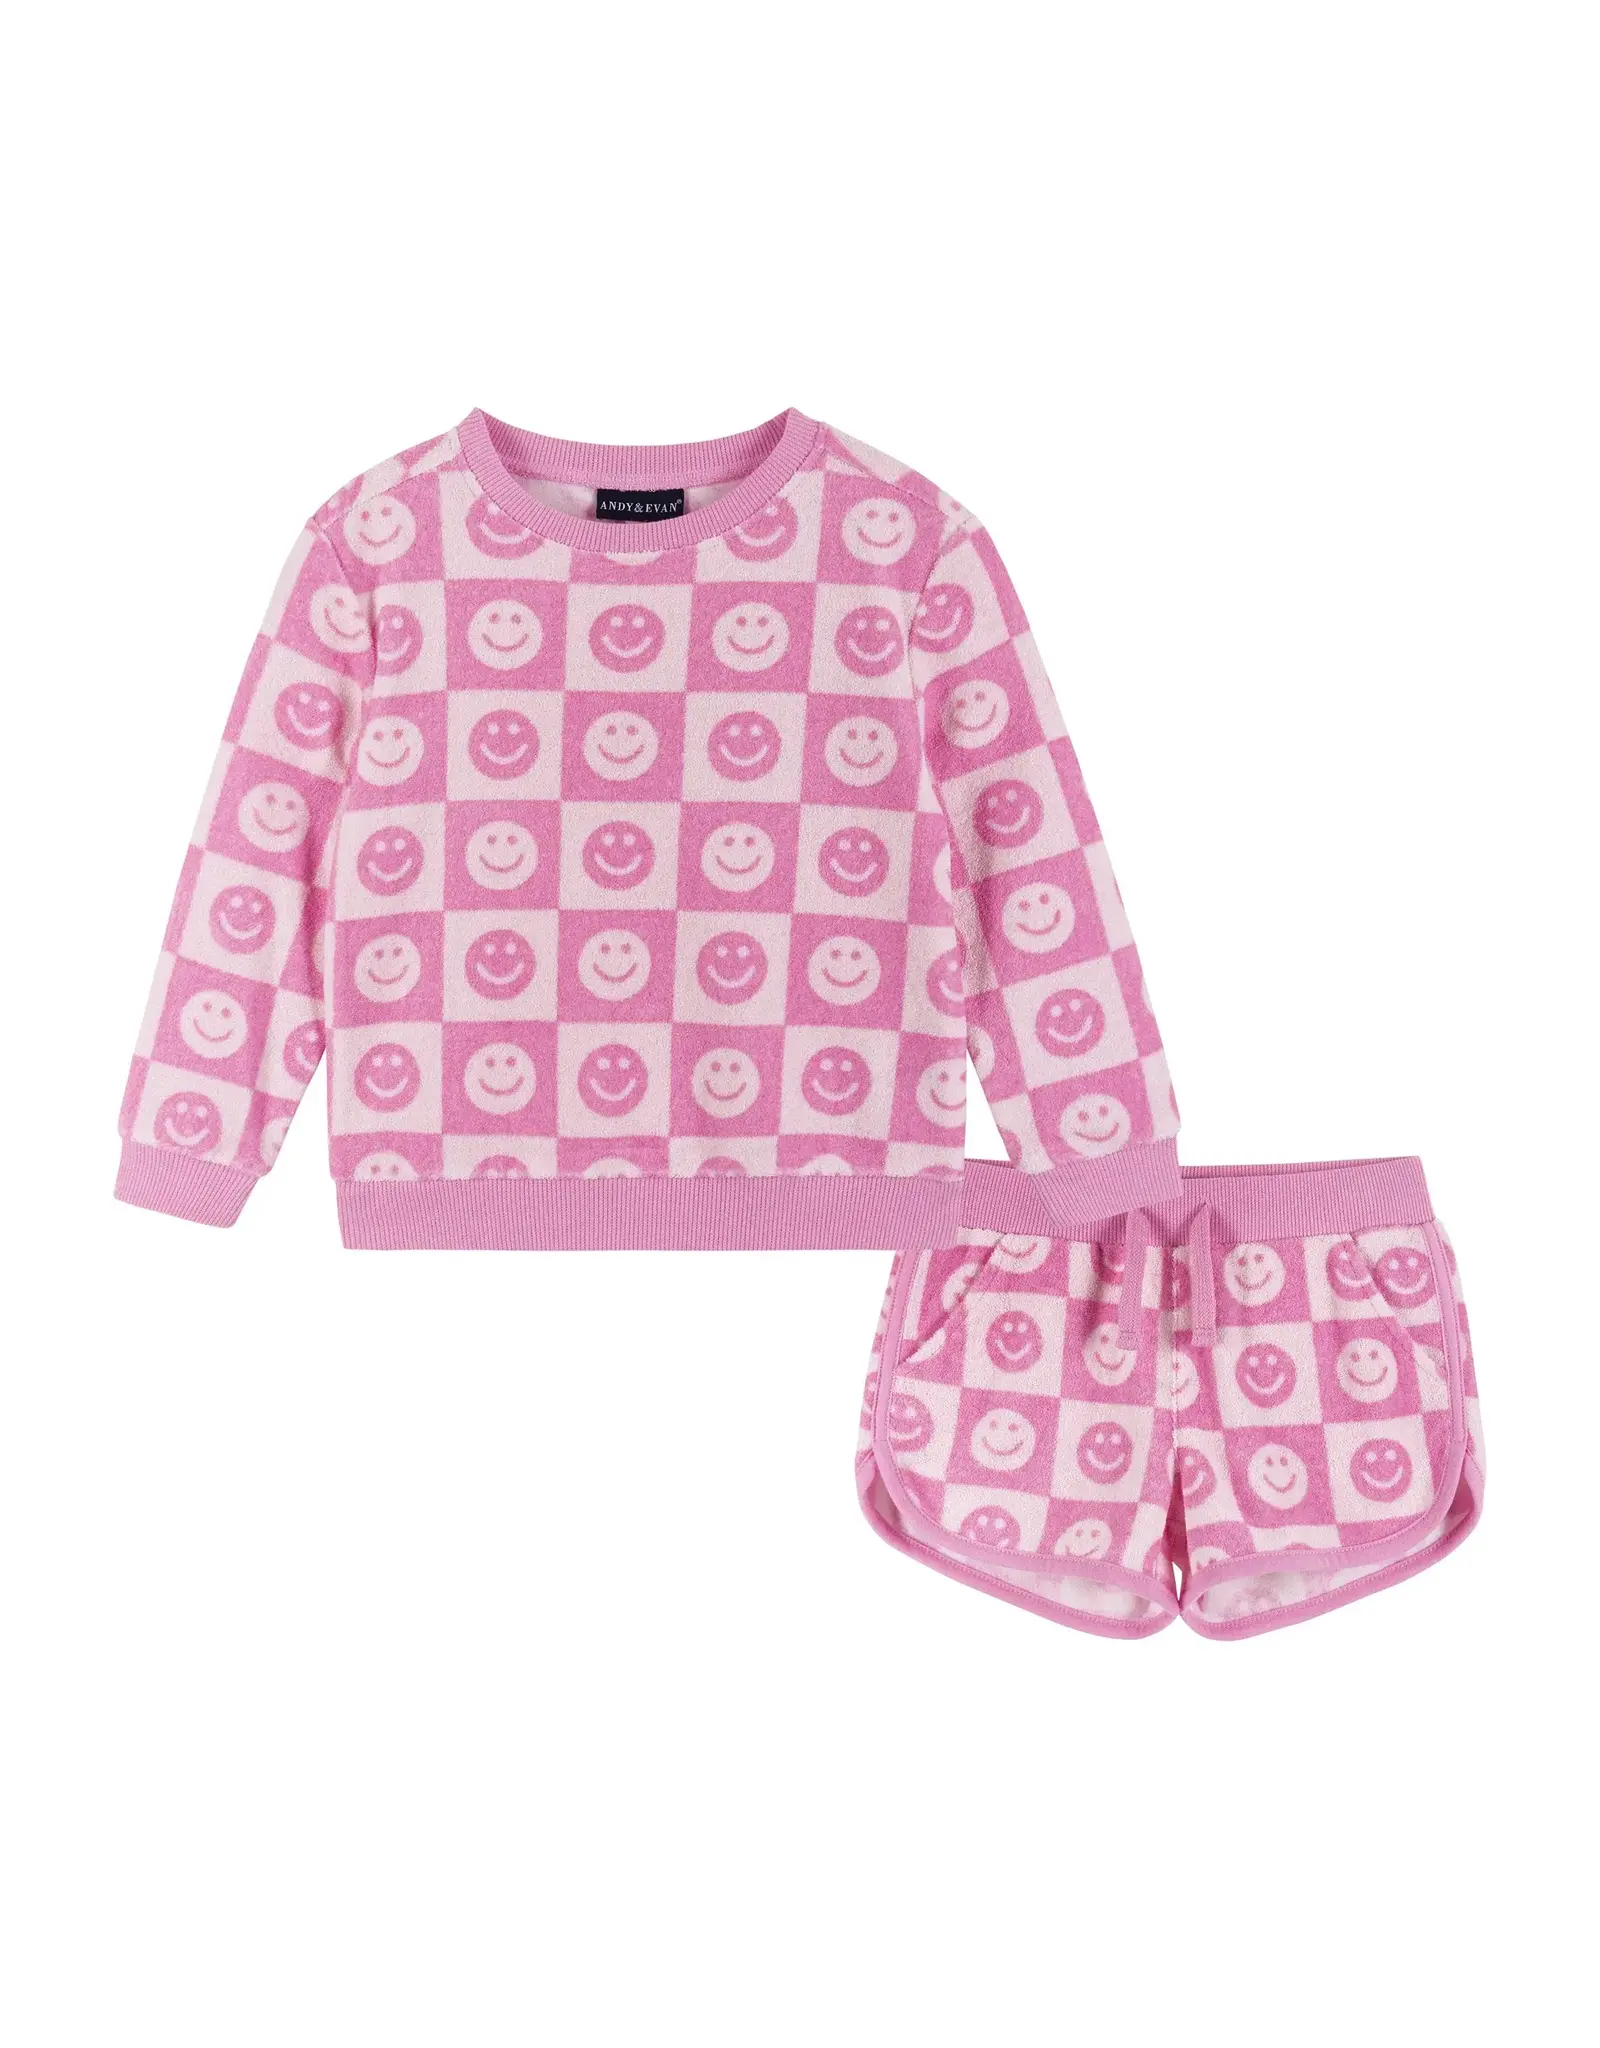 Andy & Evan AE Smiley Terry Shorts Set